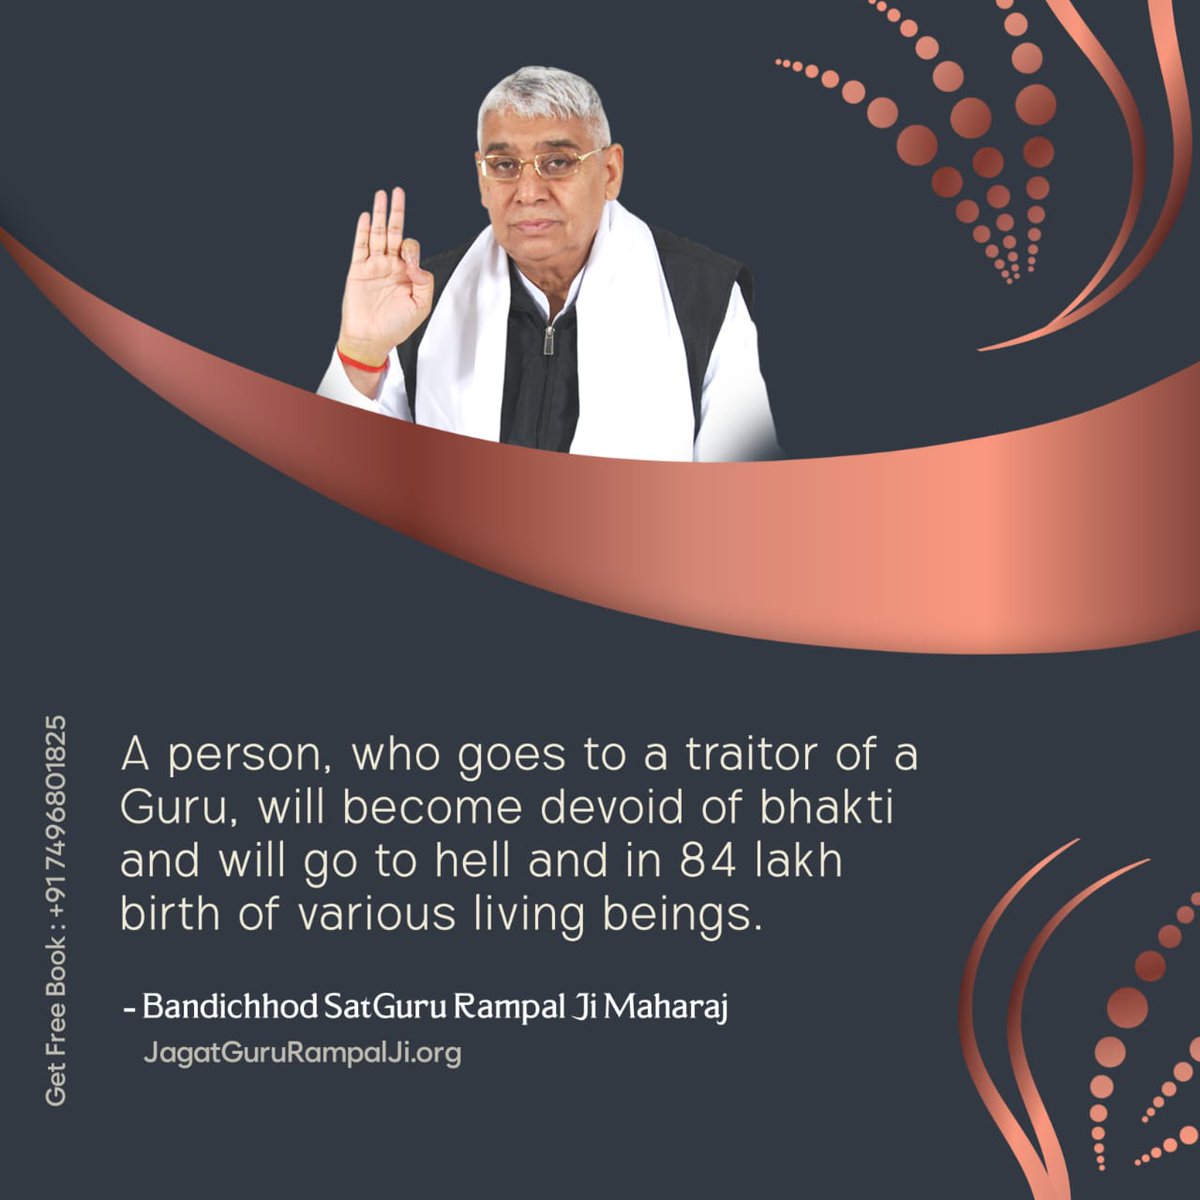 #GodMorningThursday A person, who goes to a traitor of a Guru, will become devoid of bhakti and will go to hell and in 84 lakh birth of various living beings. ~ Bandichhod SatGuru Saint Rampal Ji Maharaj Visit our Satlok Ashram YouTube Channel for more information #thursdayvibes